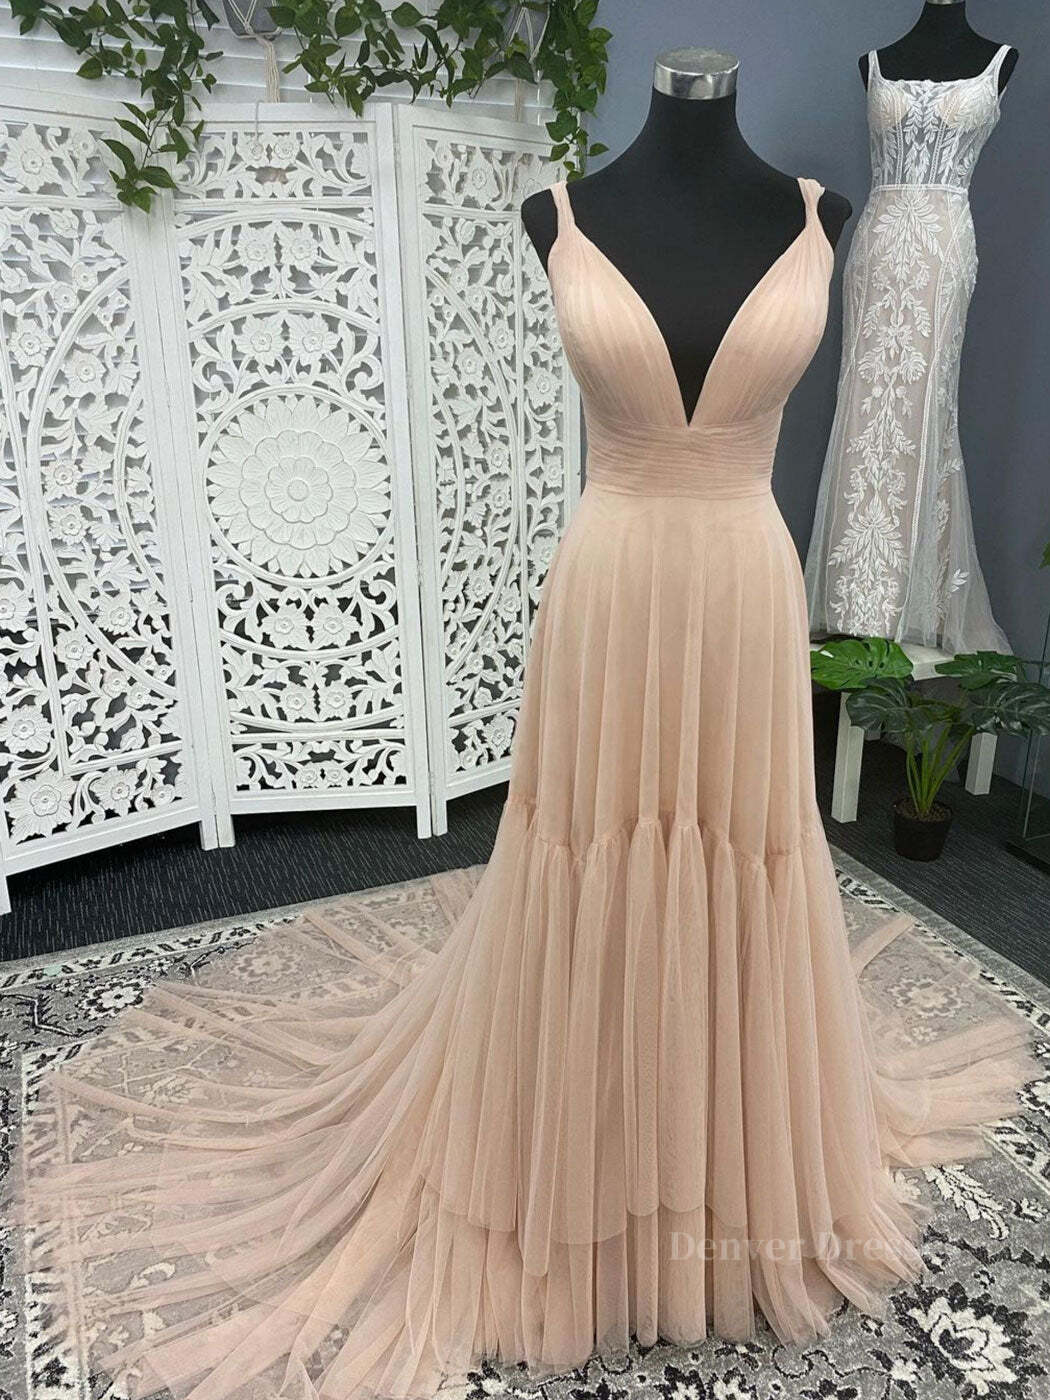 Homecoming Dresses Knee Length, Simple v neck champagne tulle long prom dress, champagne evening dress